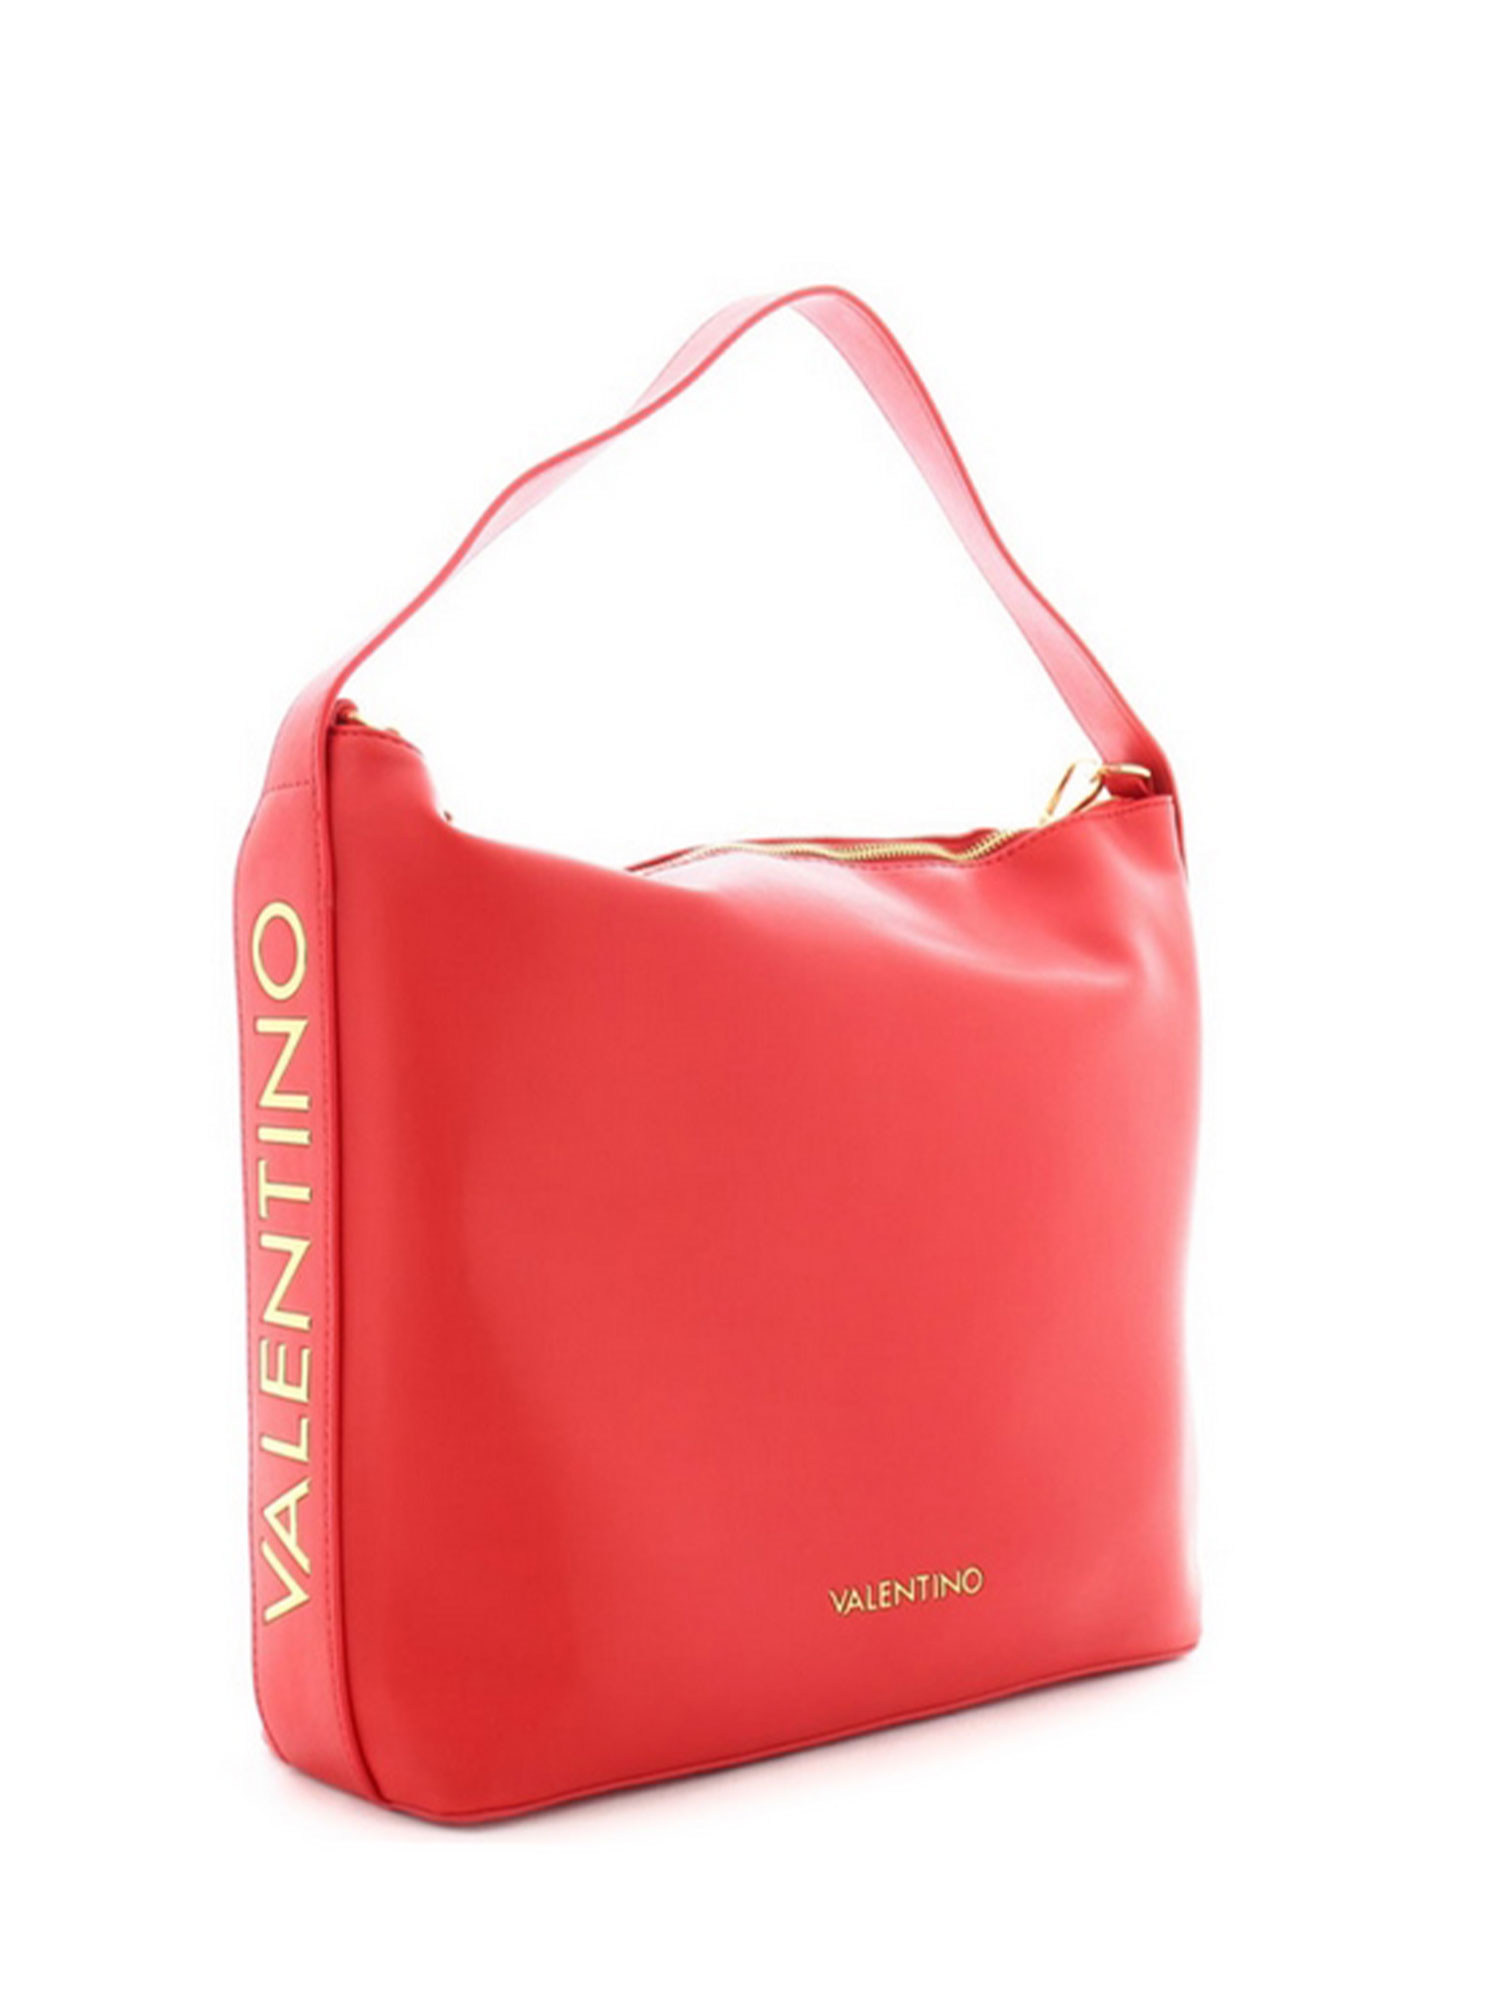 VALENTINO BAGS OLIVE - ROSSO